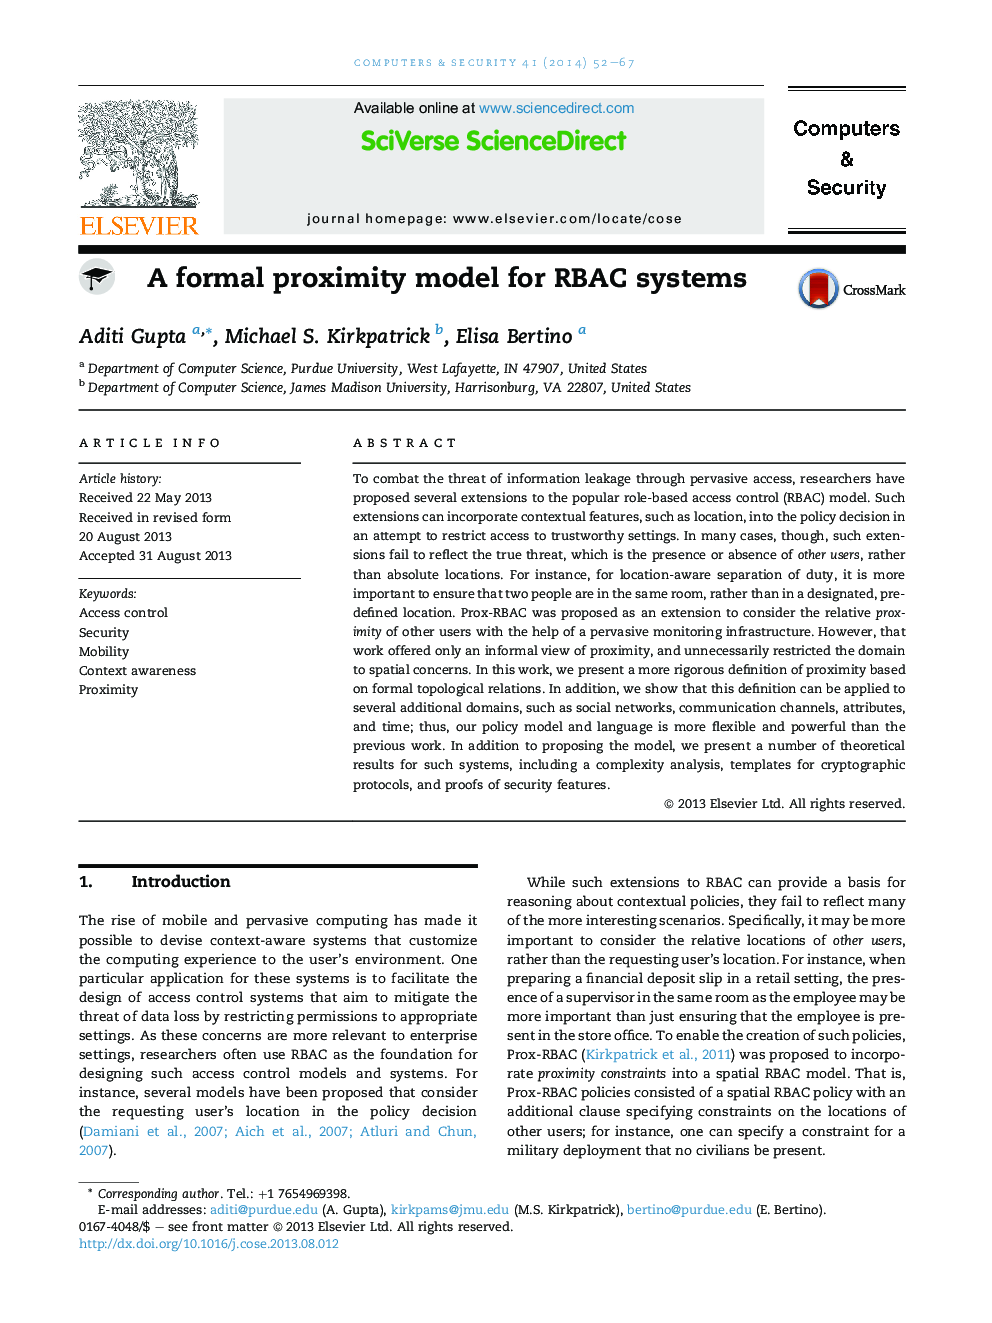 A formal proximity model for RBAC systems